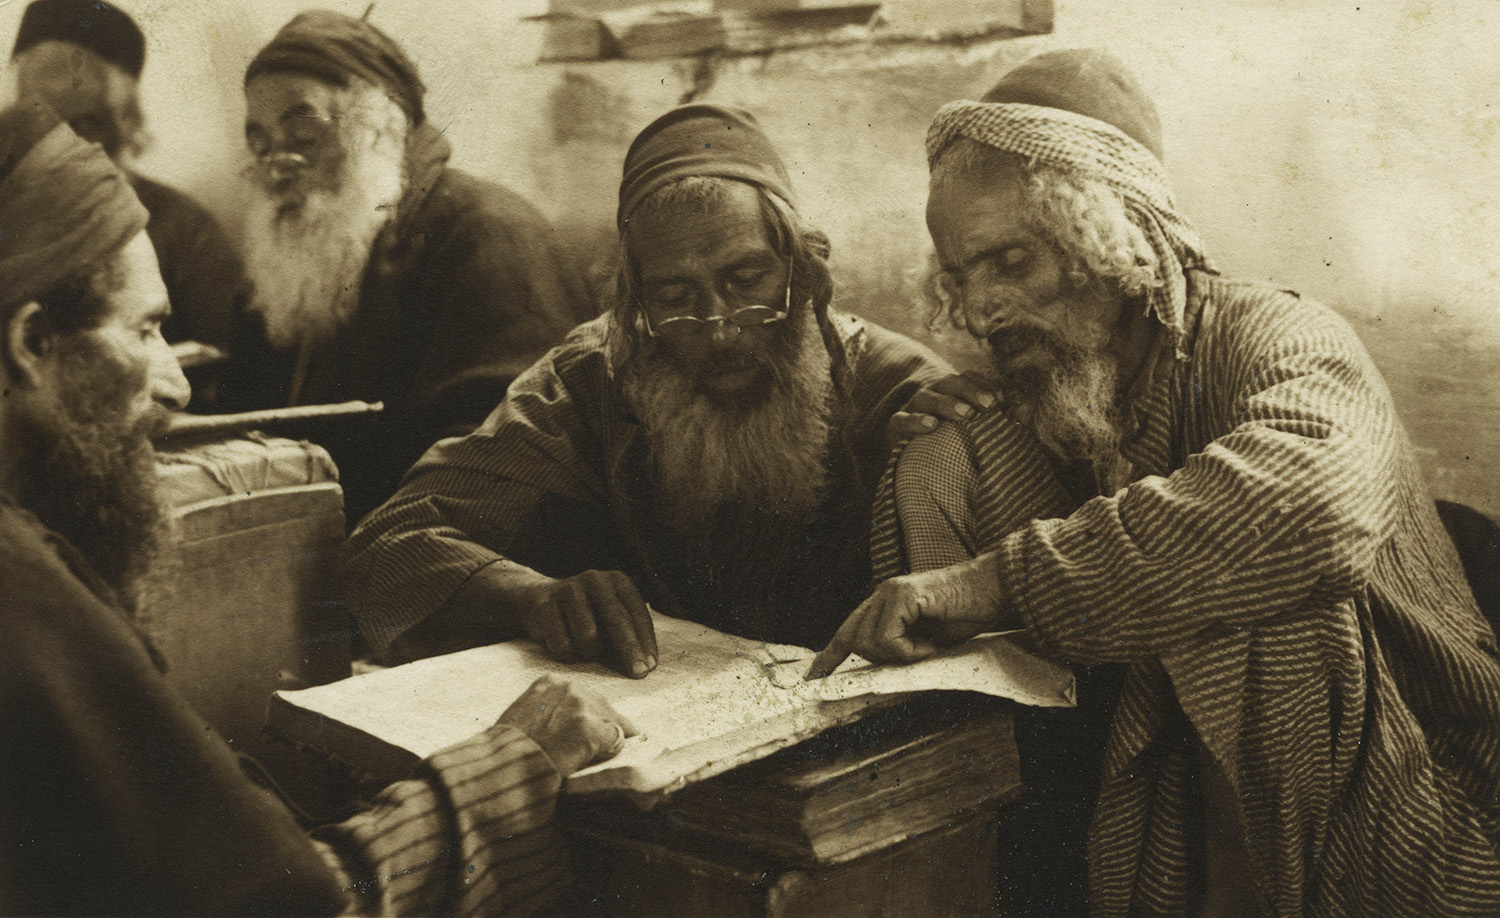 Yemenite Jews studying the Talmud in Jerusalem around 1920. History &amp; Art Images via Getty Images.
